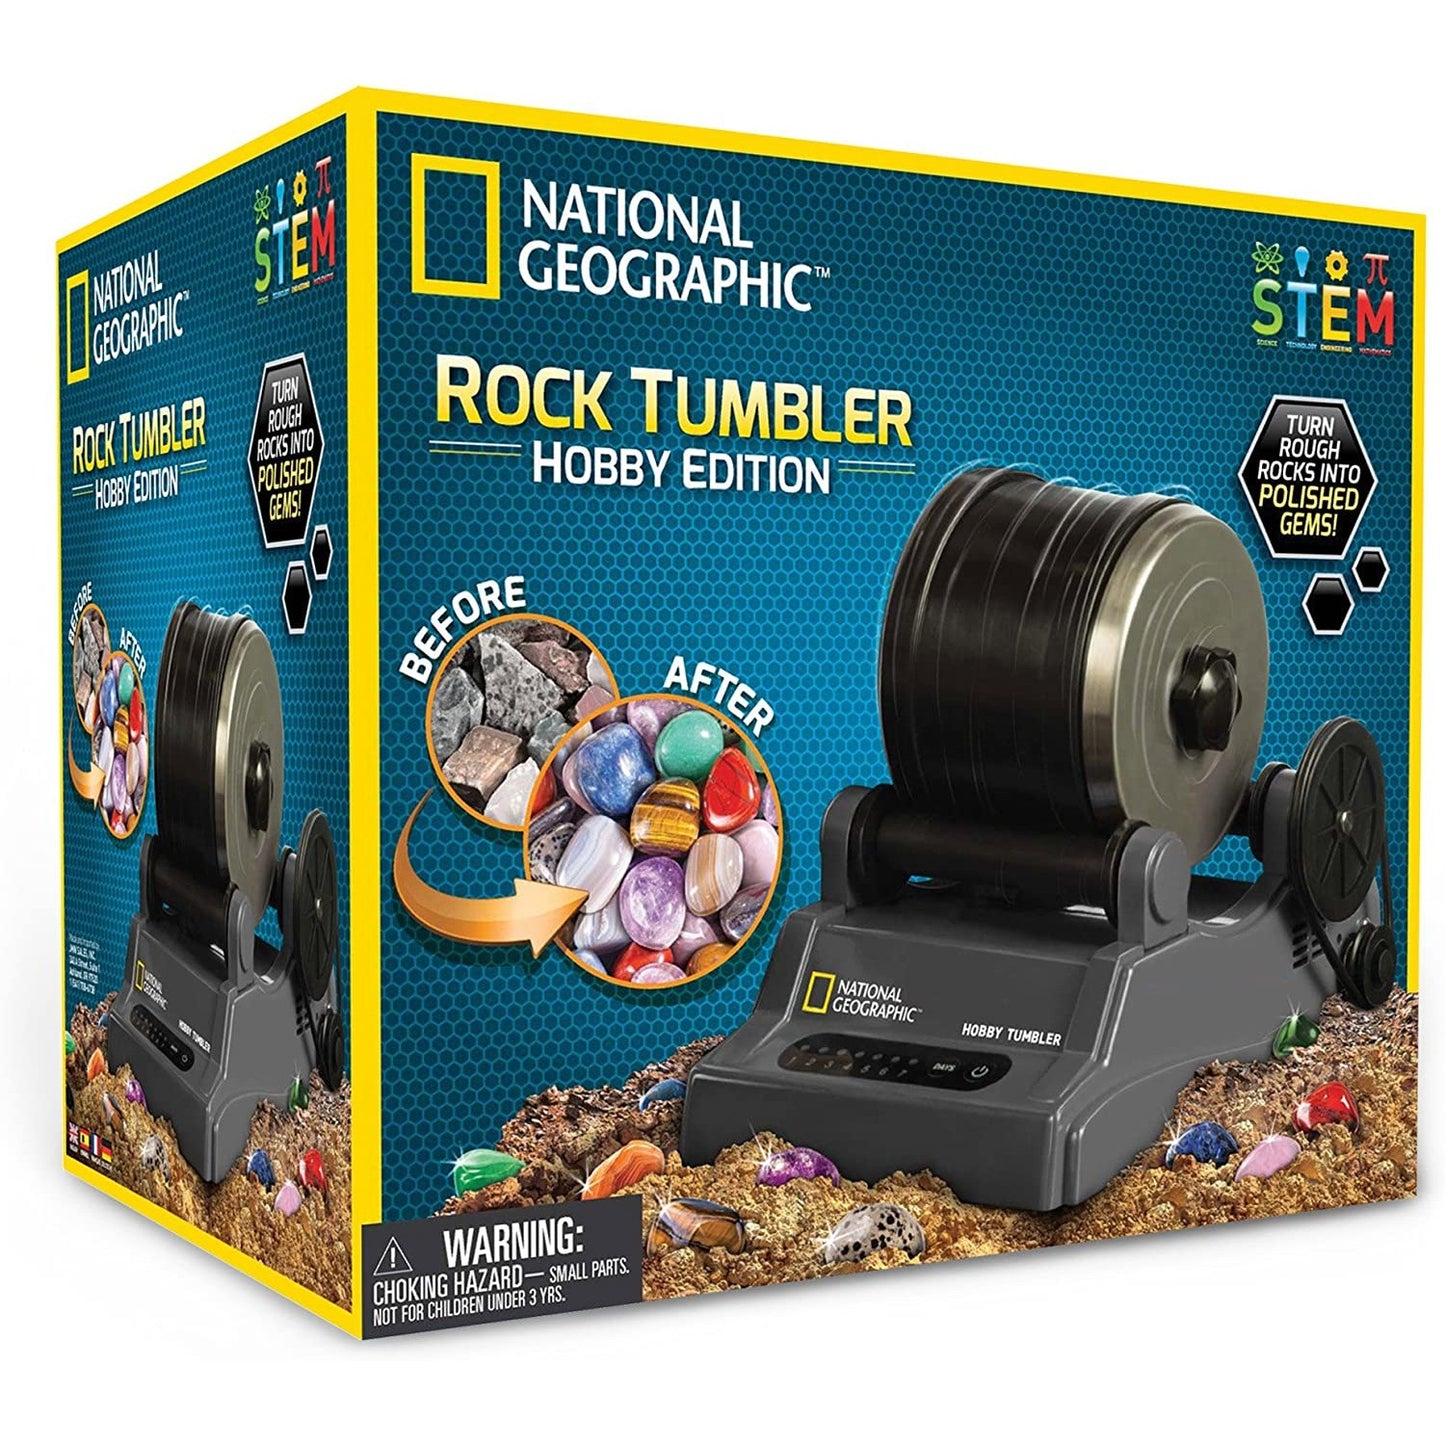 The box and packaging for a National Geographic rock tumbler kit.